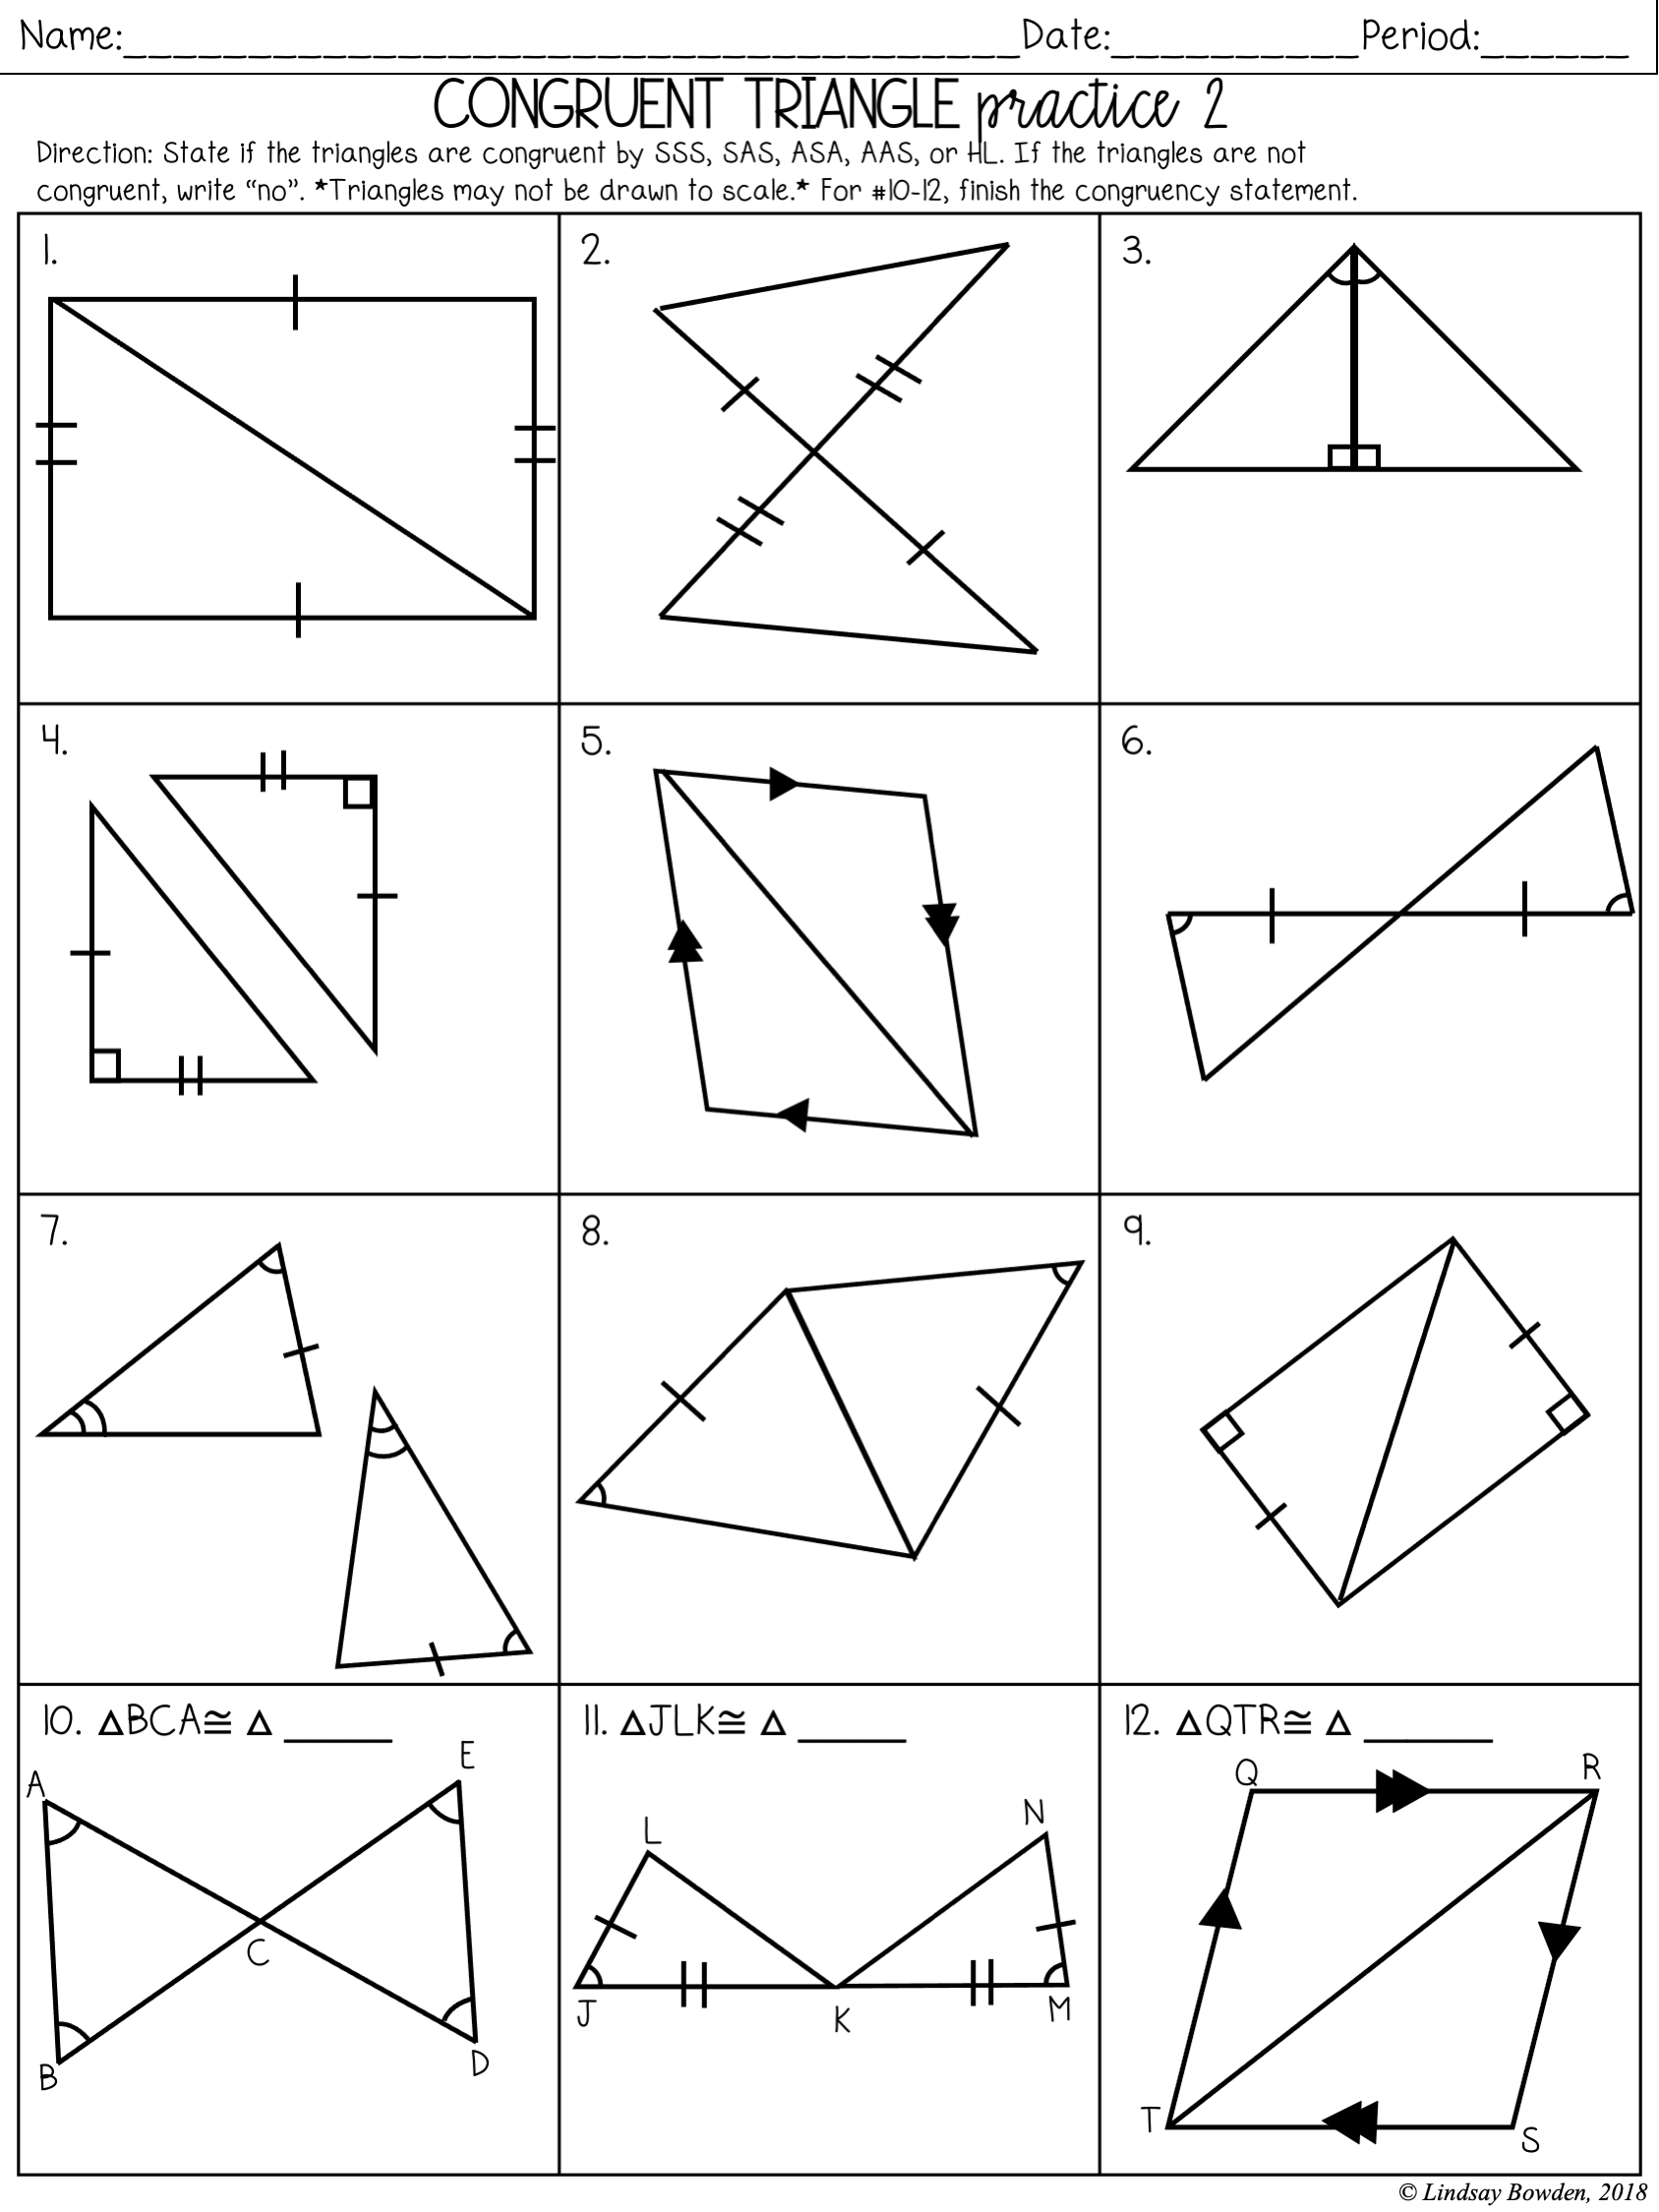 Congruent Triangles Notes and Worksheets - Lindsay Bowden For Sss Sas Asa Aas Worksheet